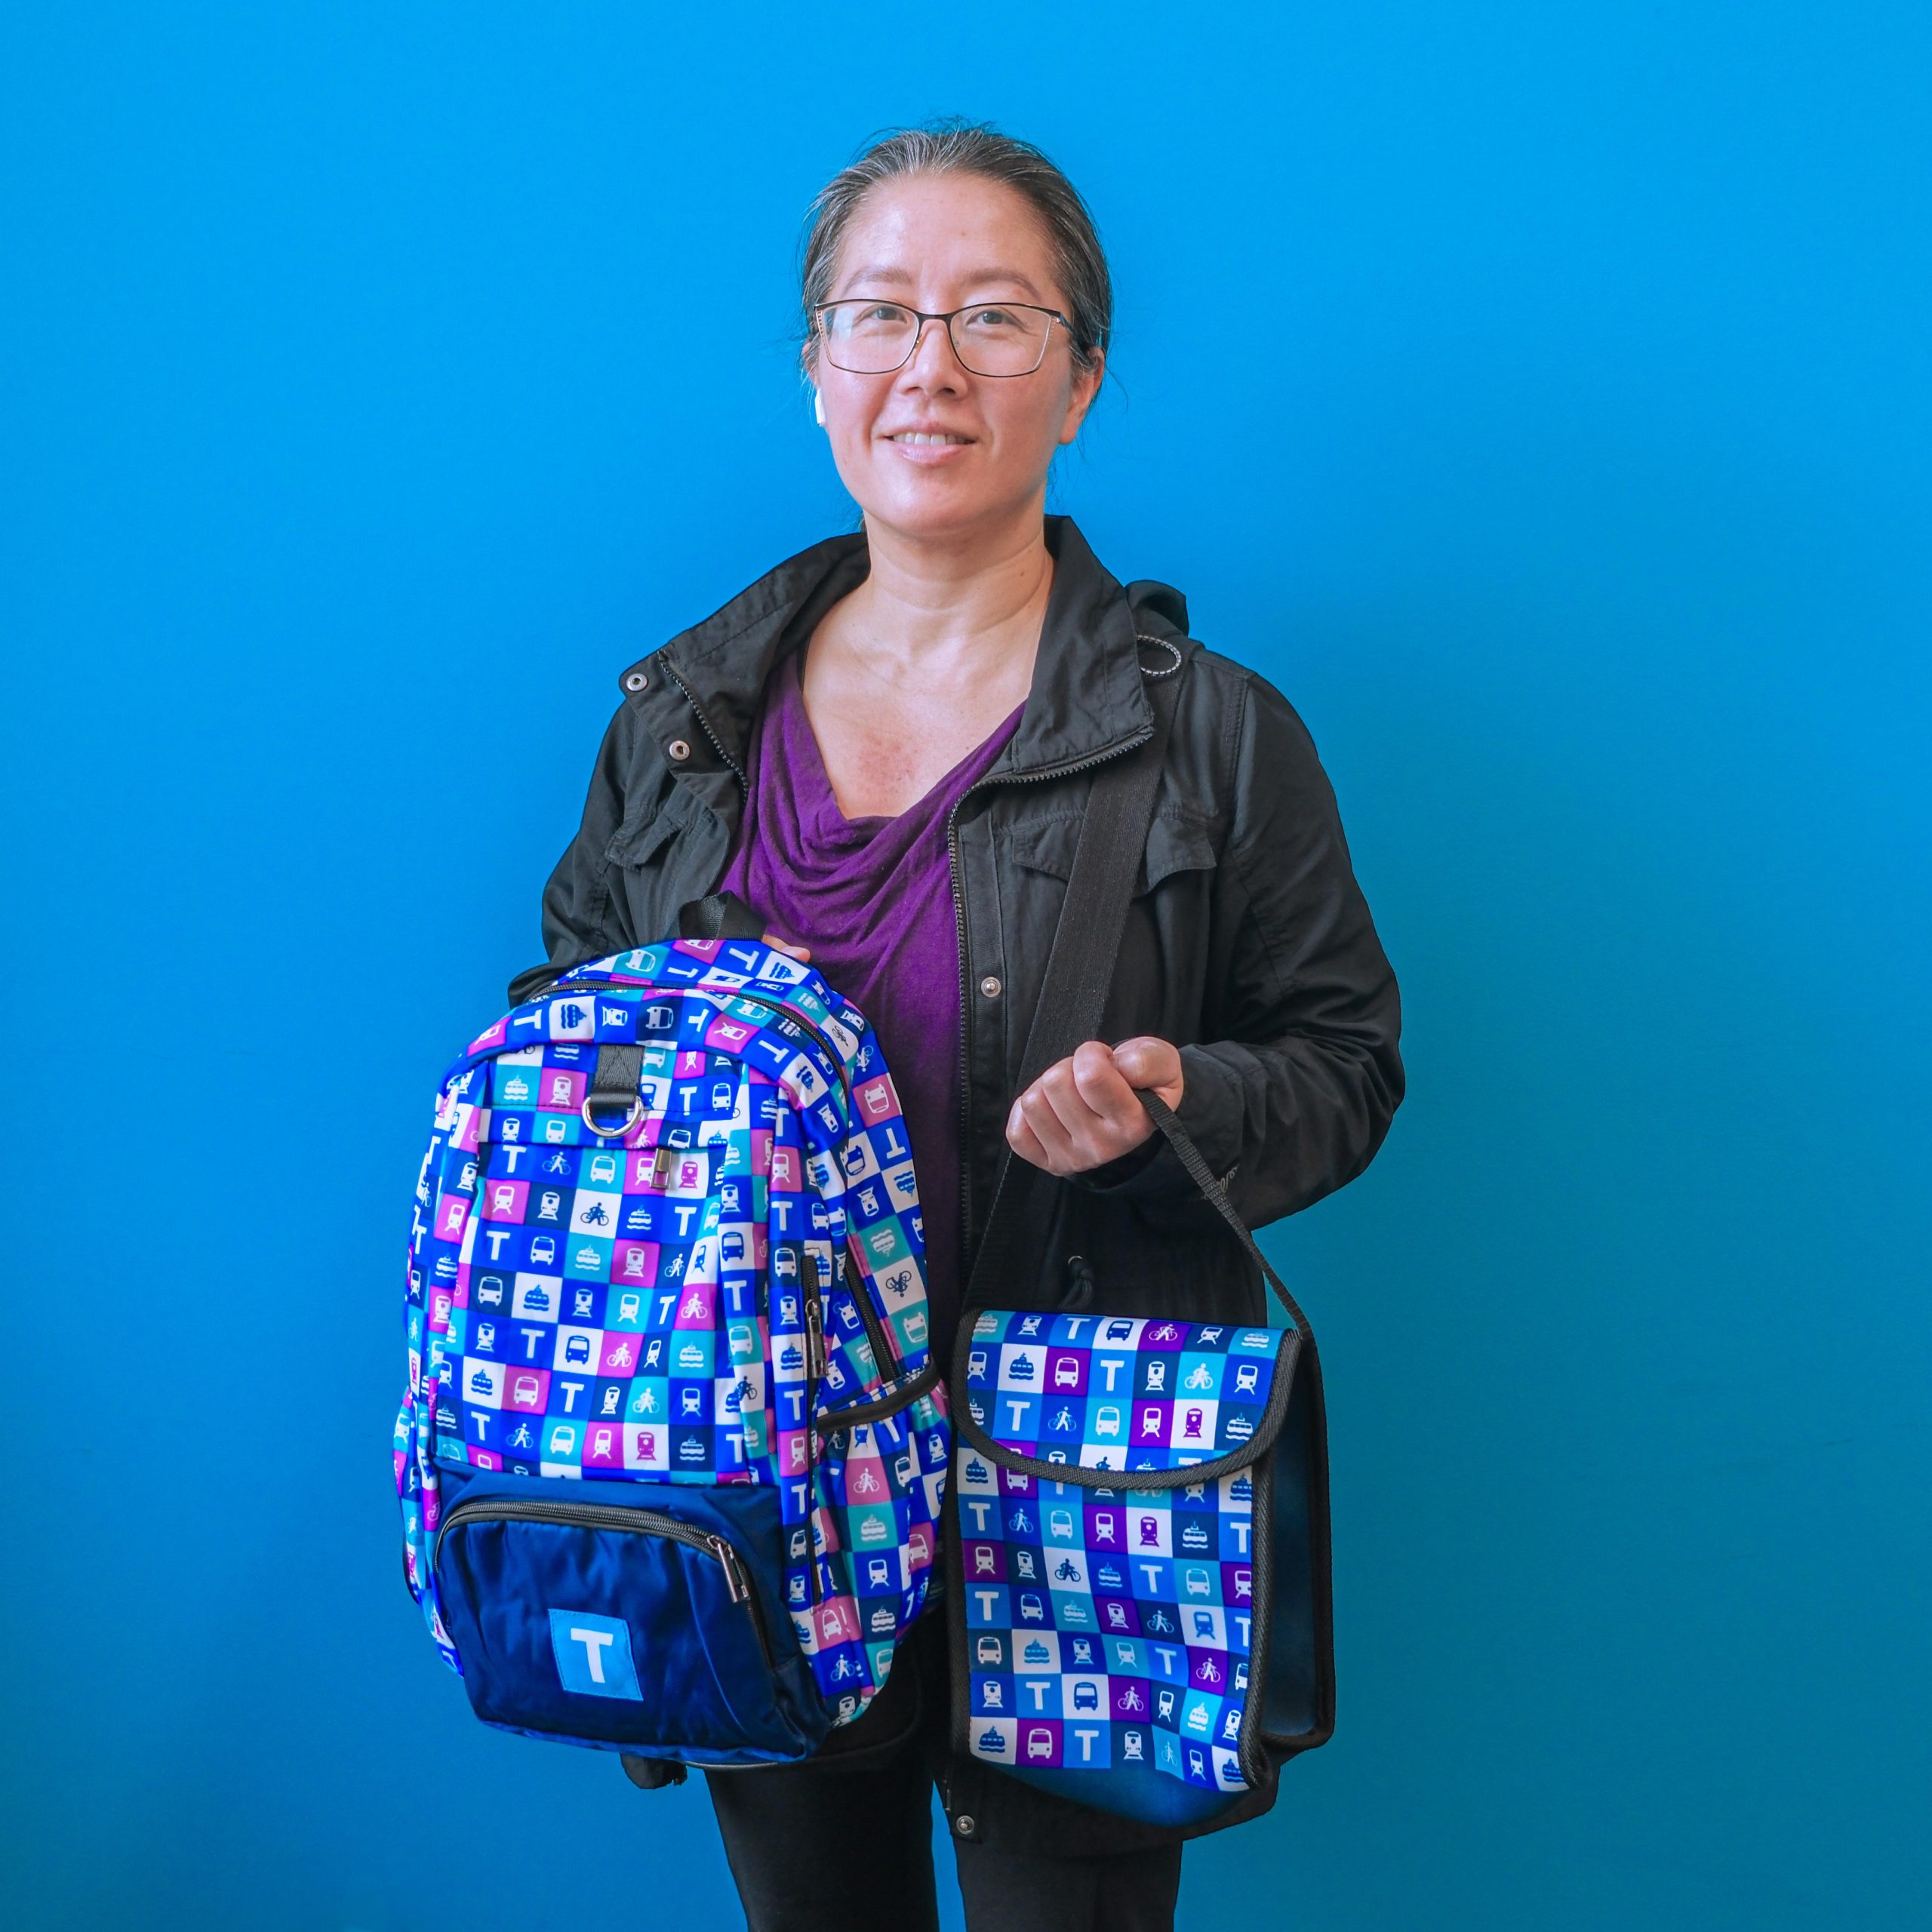 Tina won a TransLink Store merchandise package.